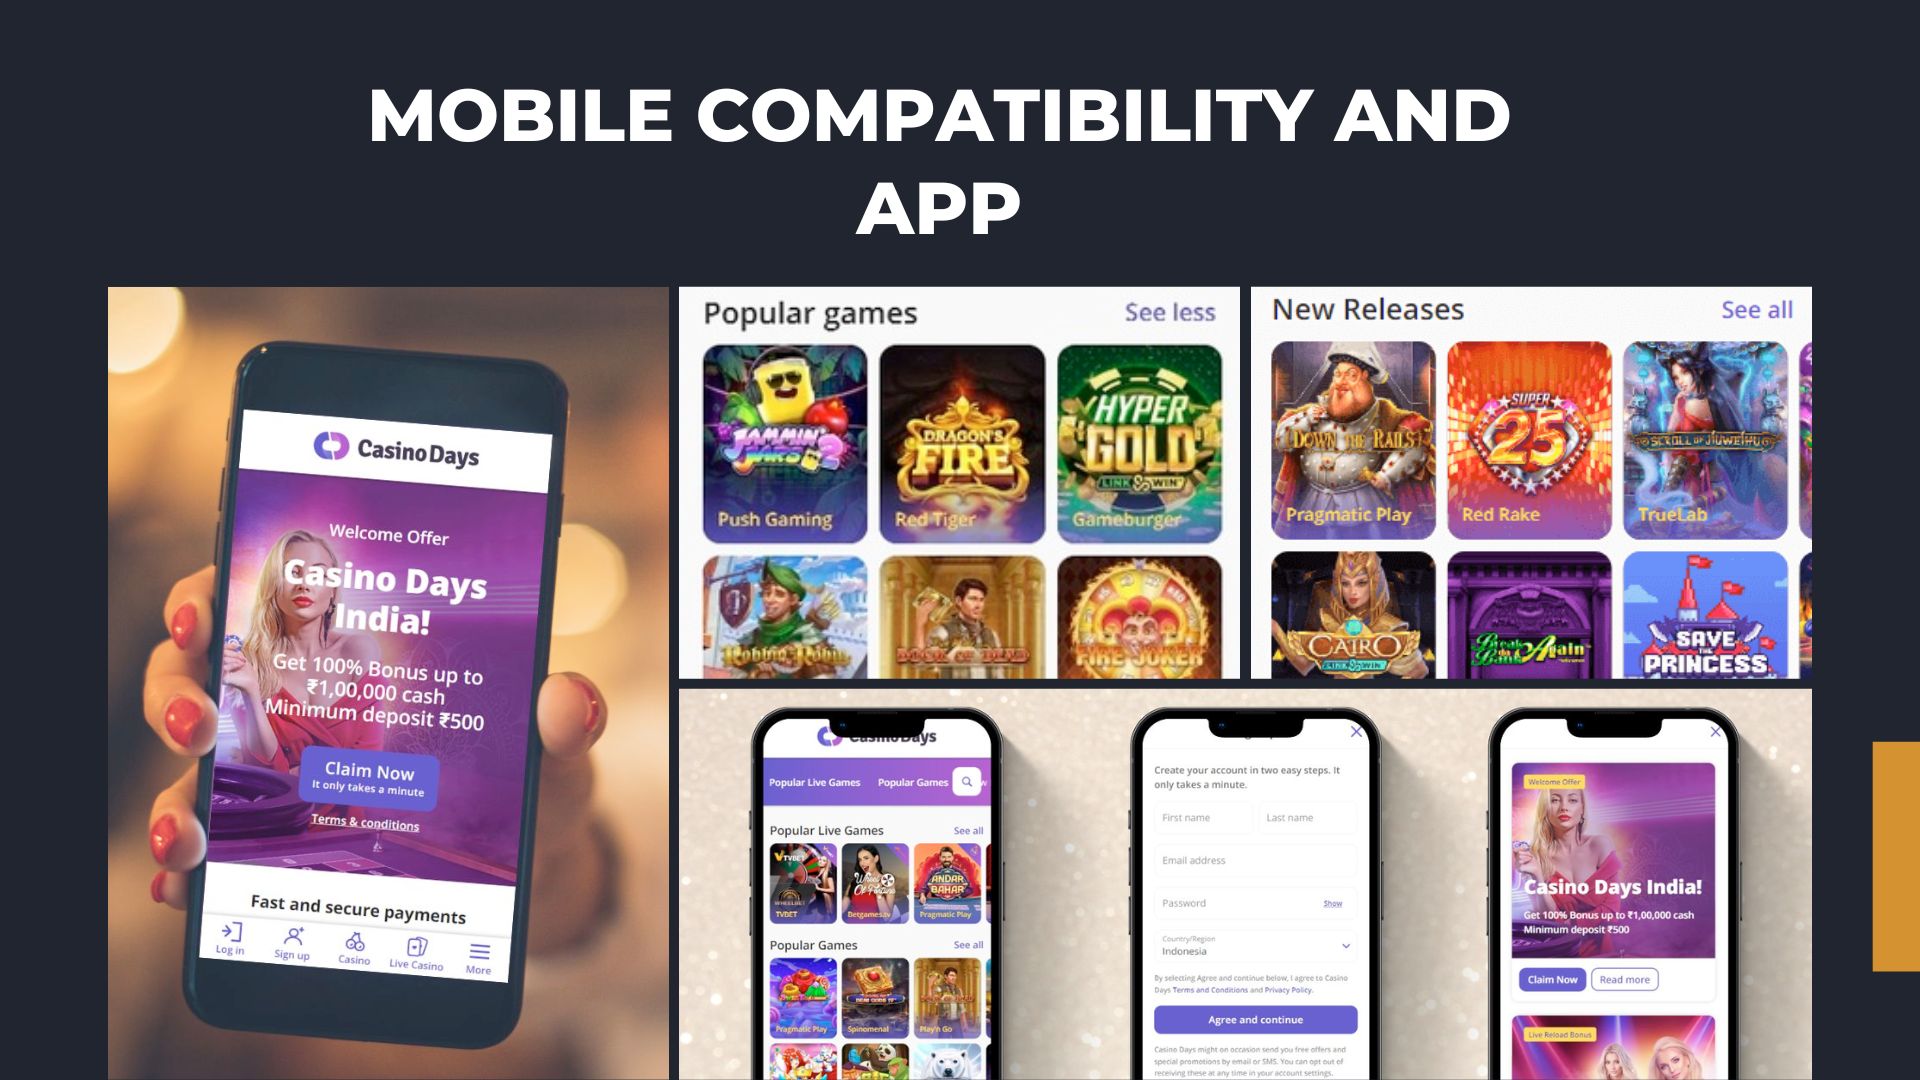 Casino days Mobile Compatibility and App